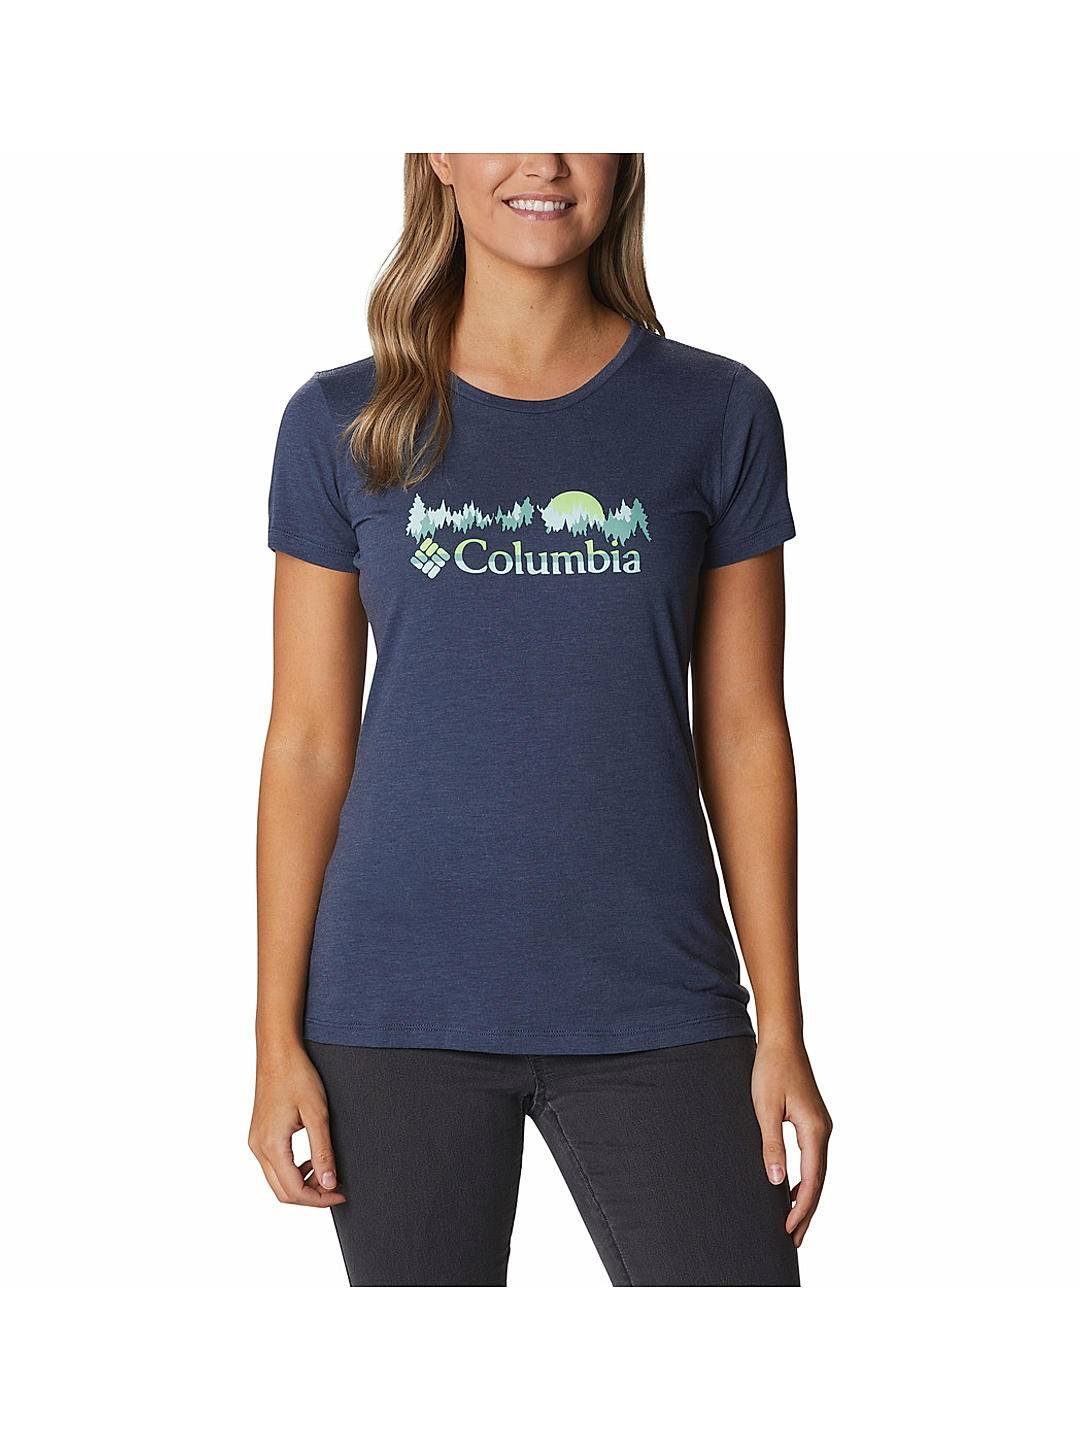 Graphic 480451 Buy Sportswear Ss Daisy Days at Women for | Tee Blue Columbia Online